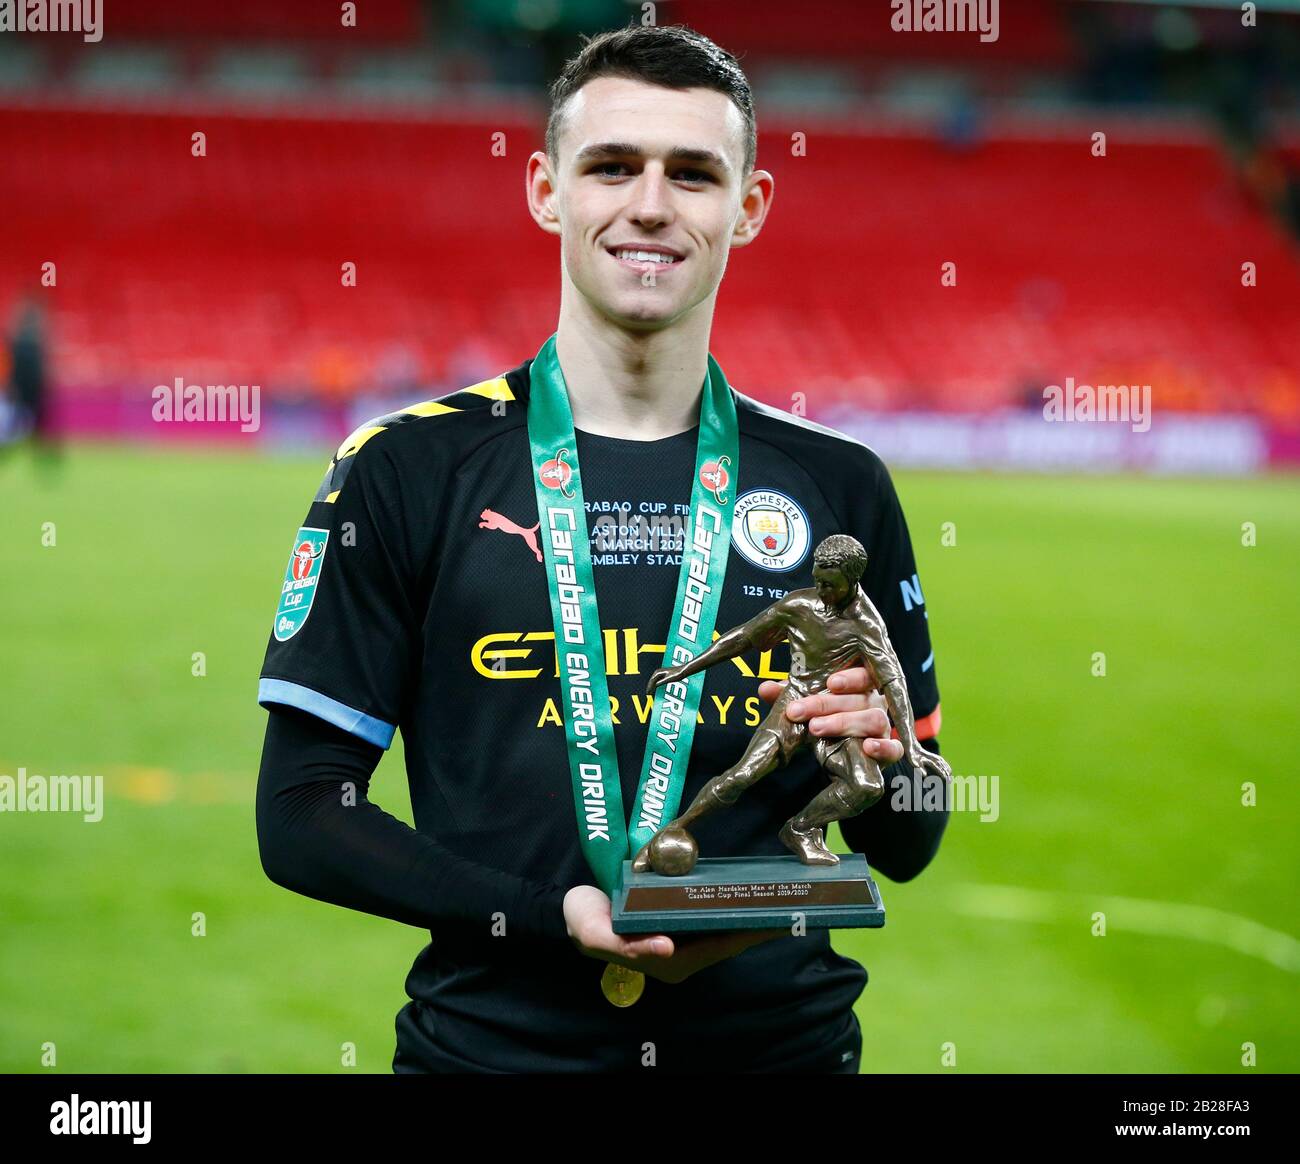 London, UK. 1st Mar 2020. Manchester City's Phil Foden with men of the MatchCarabao Cup Final between Aston Villa and Manchester City at Wembley Stadium, London, England on 01 March 2020 Credit: Action Foto Sport/Alamy Live News Stock Photo